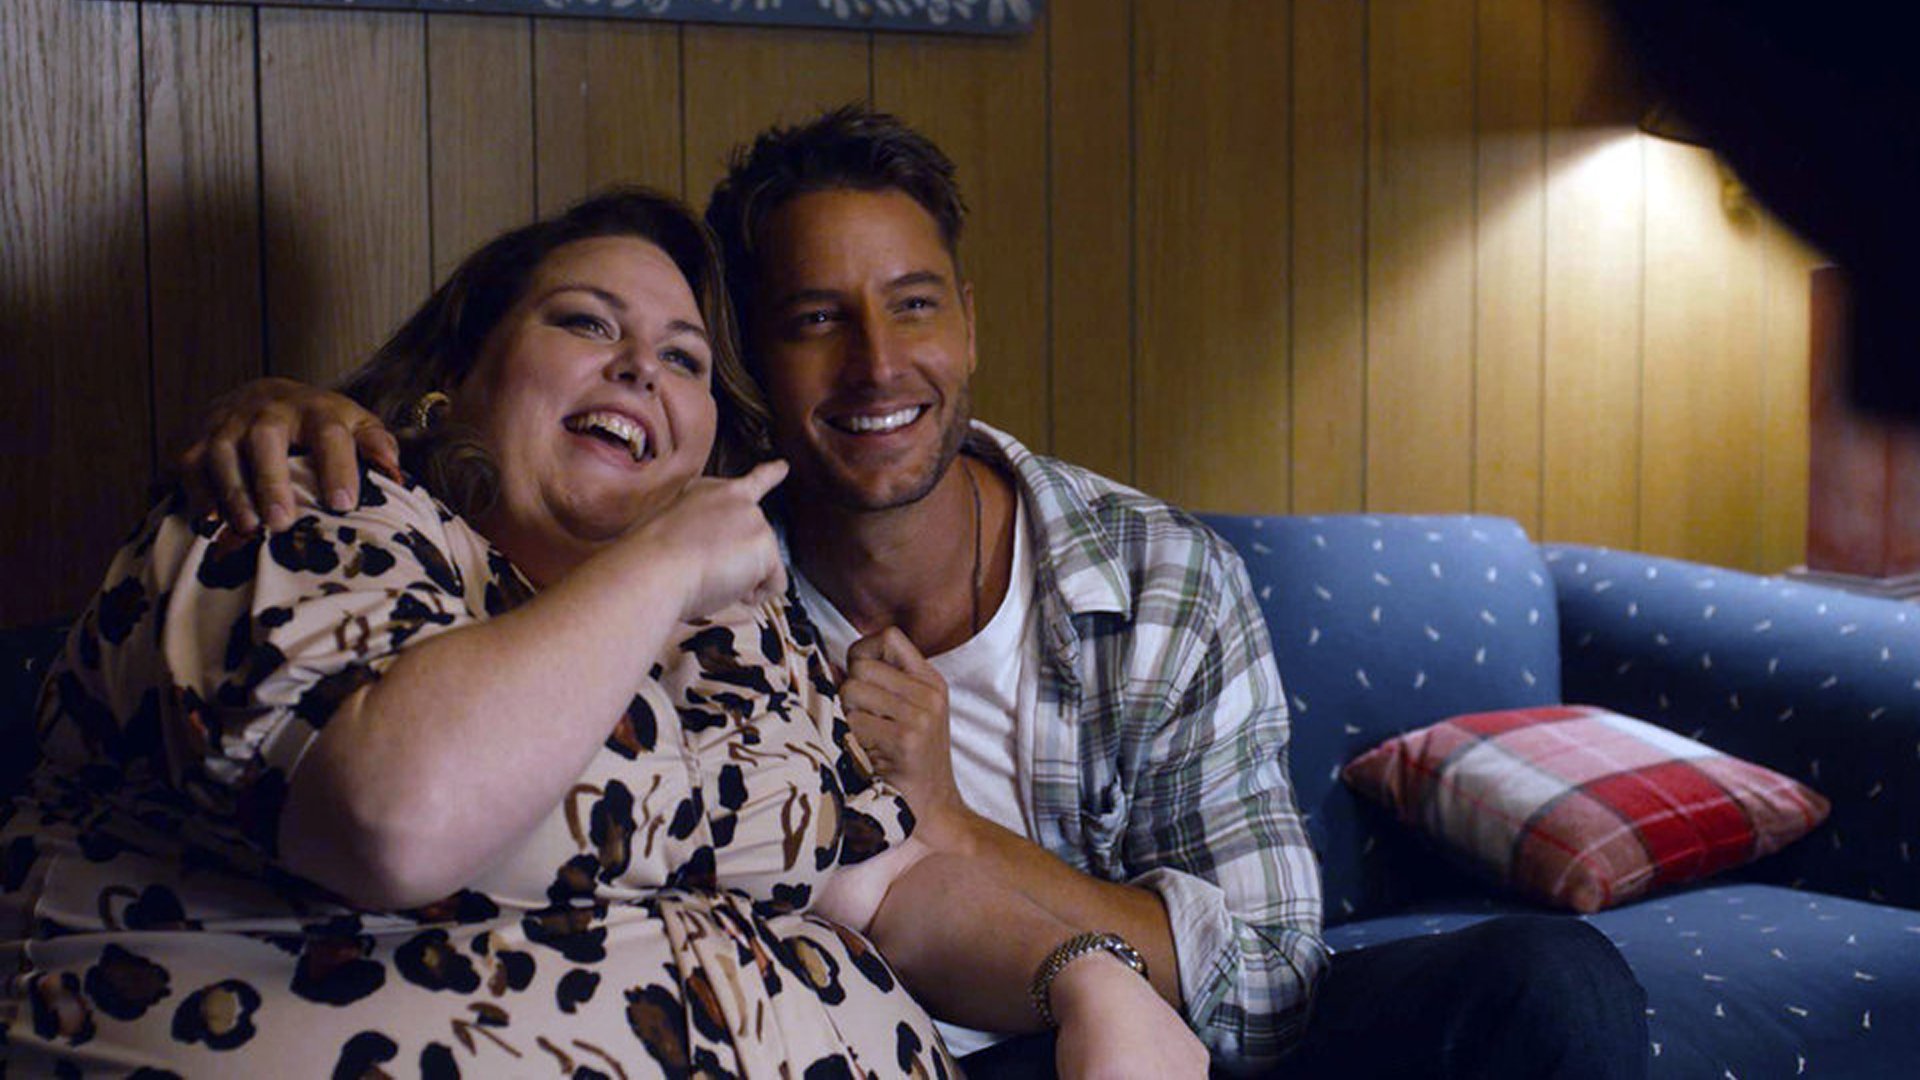 Chrissy Metz as Kate and Justin Hartley as Kevin on 'This Is Us' Season 5 premiere in 2020